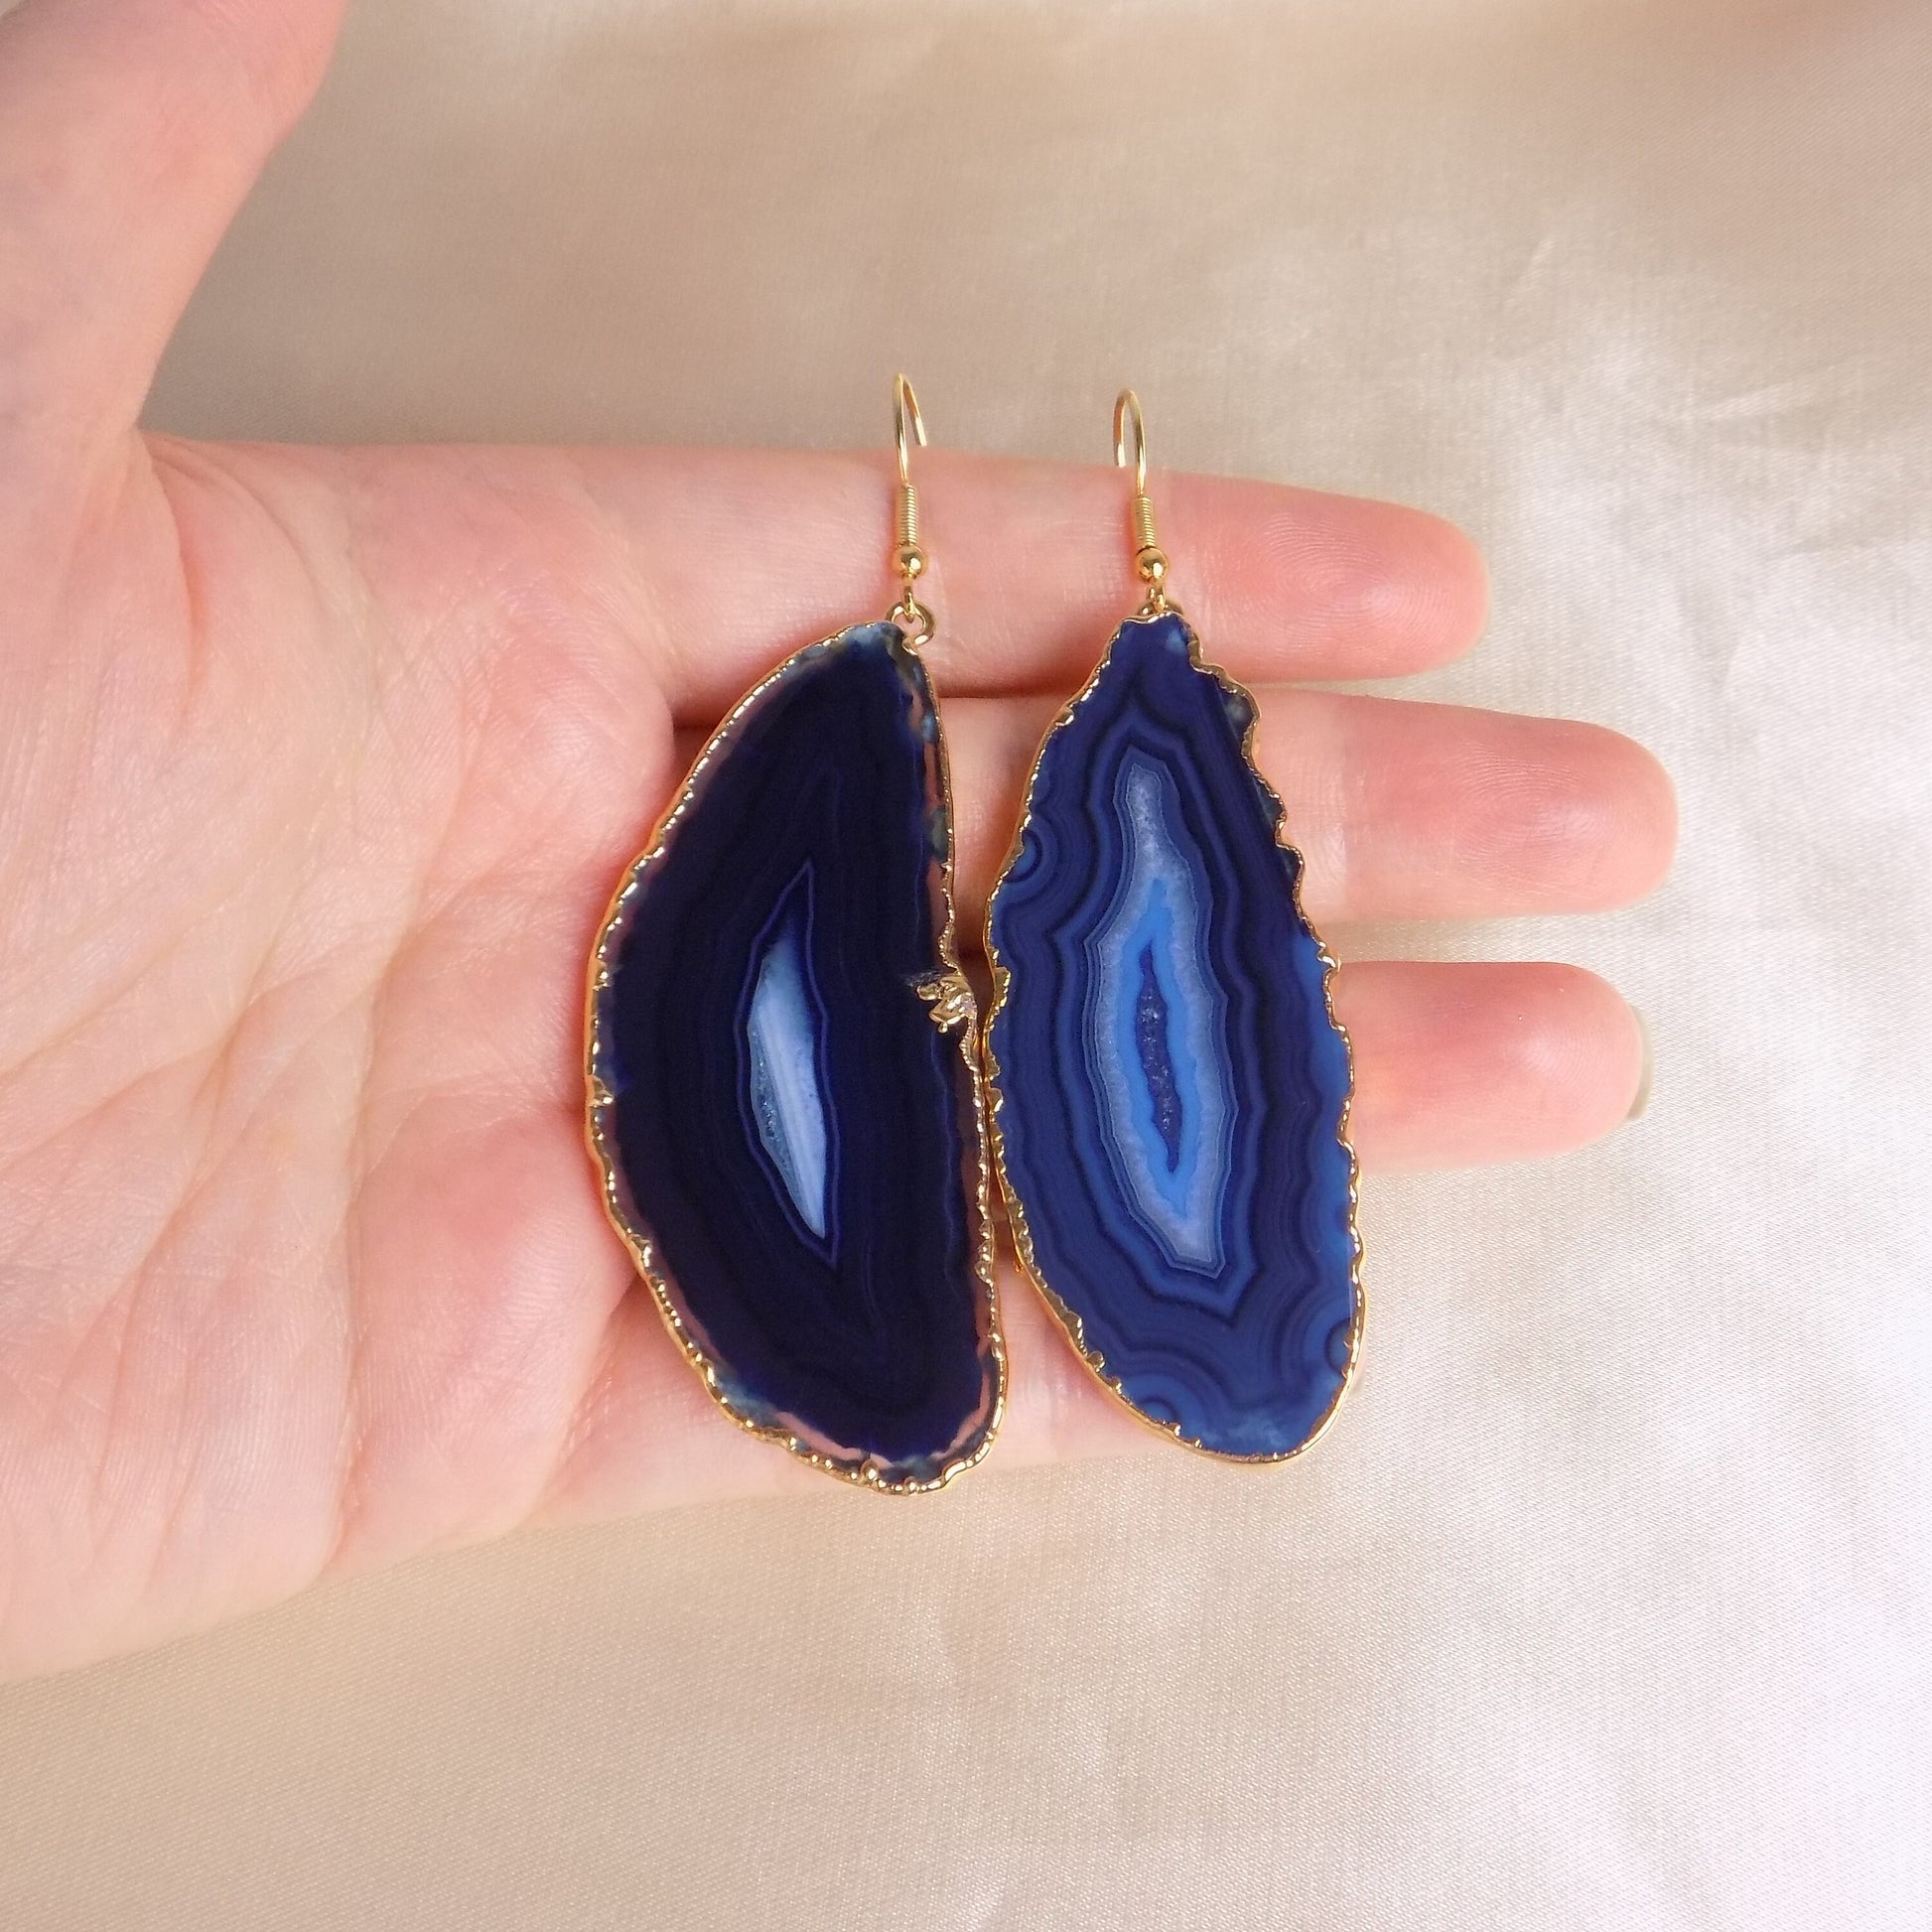 Large Blue Agate Earrings - Unique Crystal Jewelry